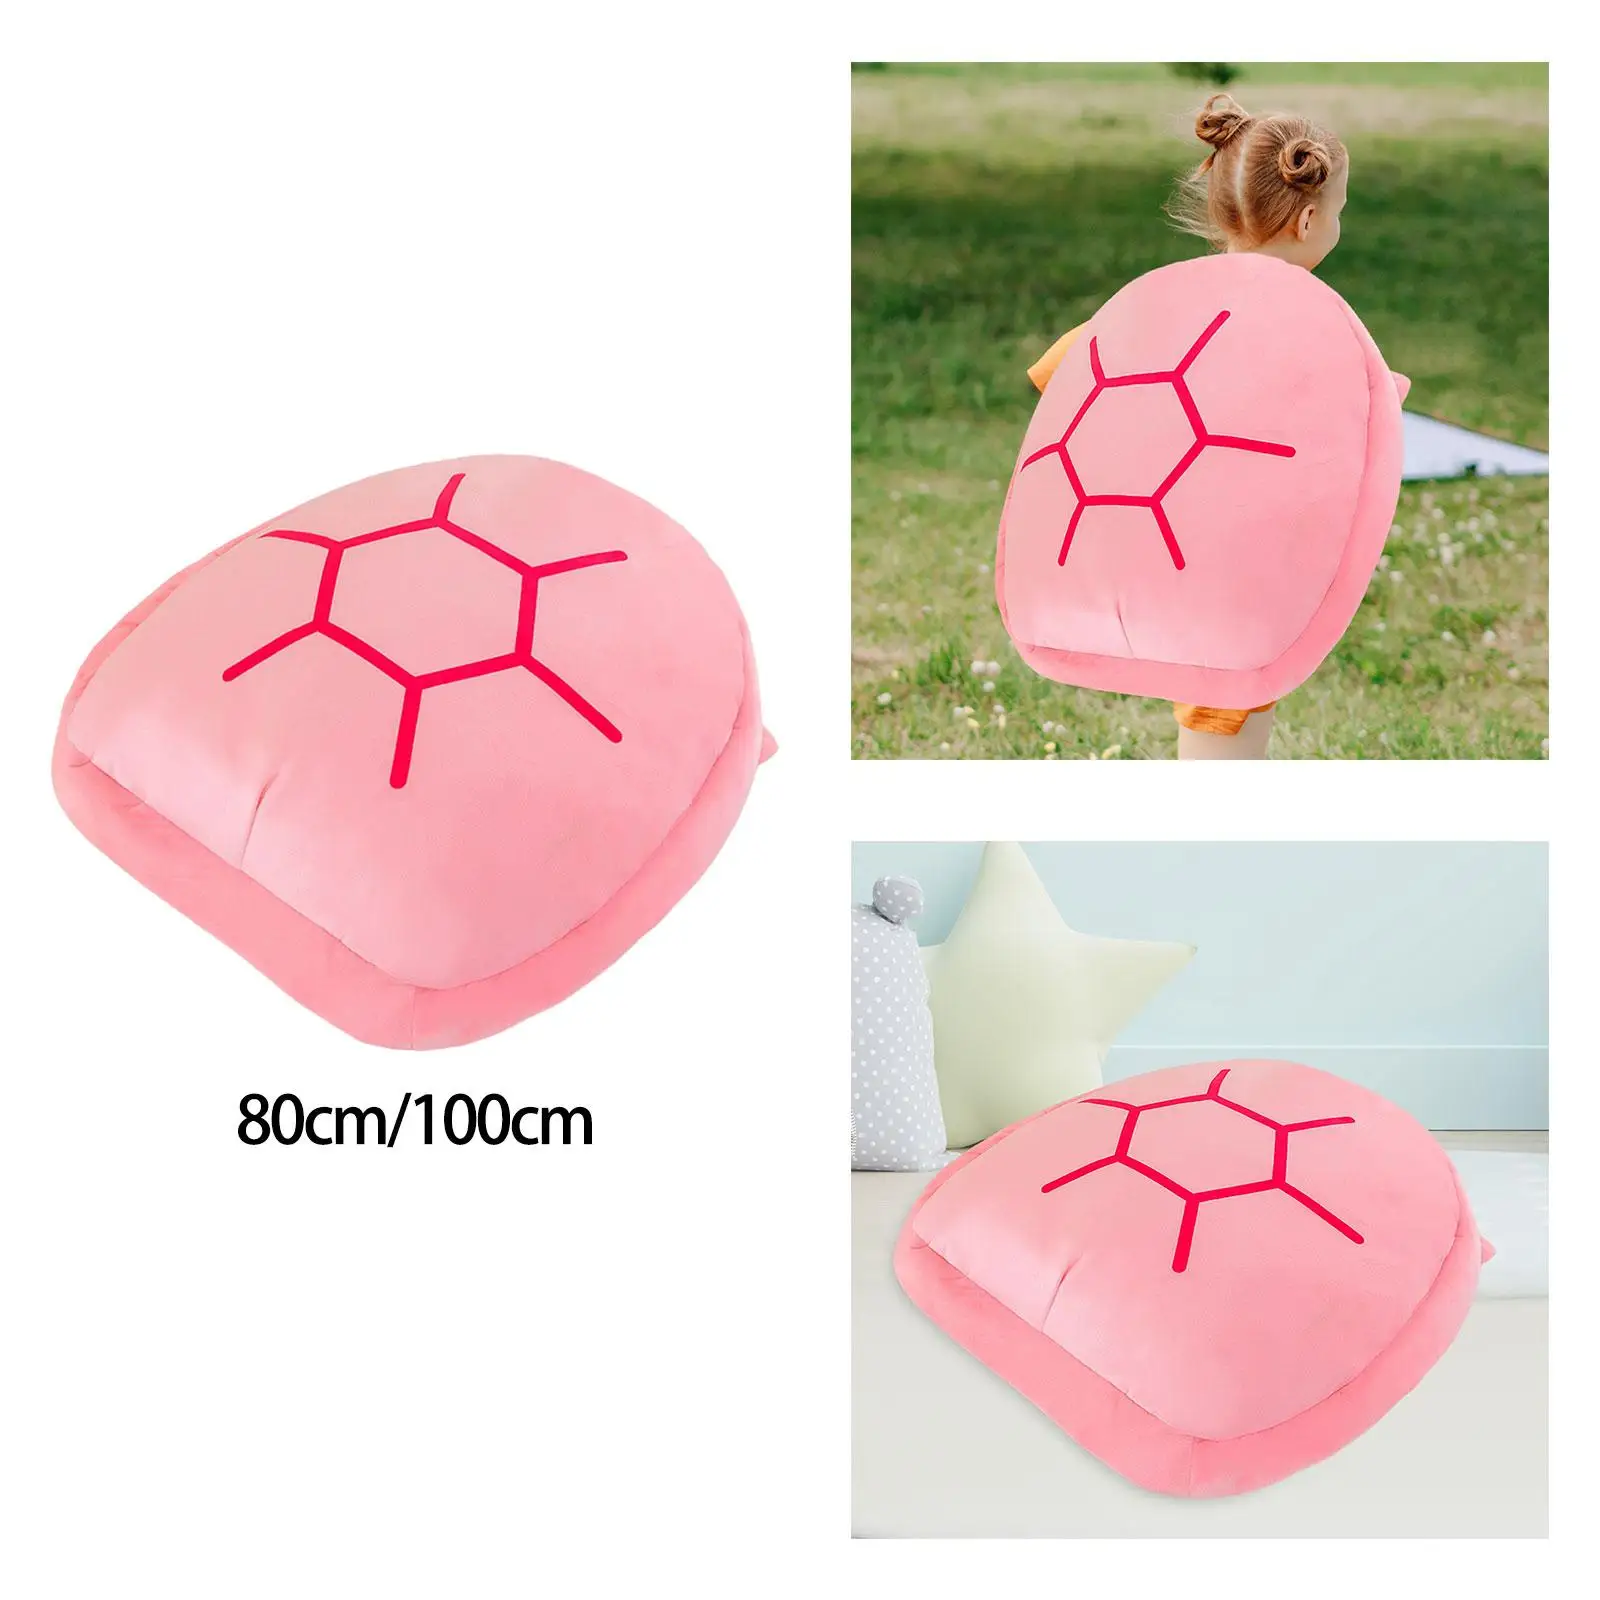 Creative Wearable Turtle Shell Cushion Dress up Stuffed Animal Costume Plush Toy Tortoise Clothes Stuffed Toy for Bedroom Gift